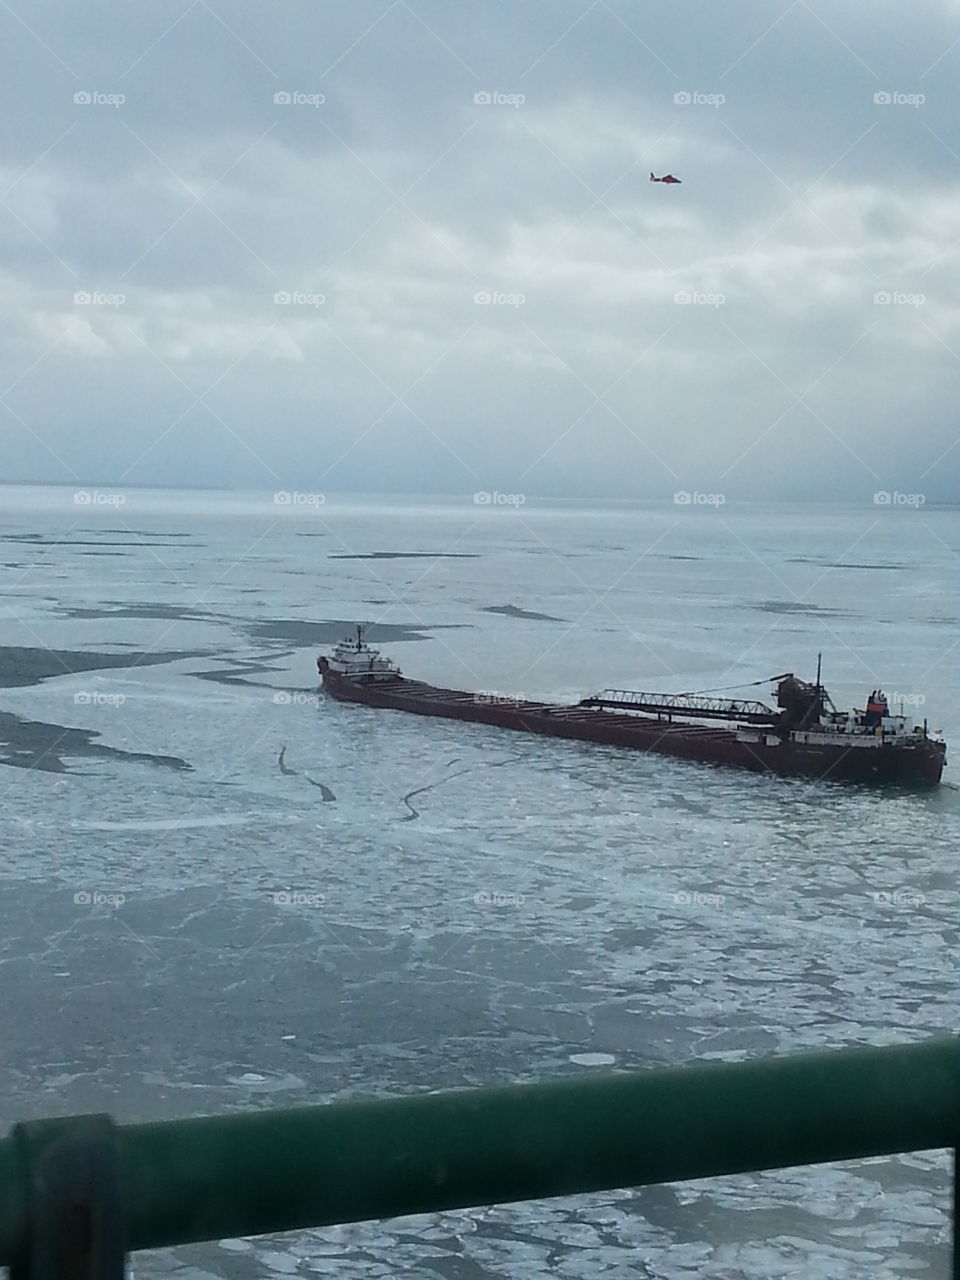 Stuck In The Ice. A freighter stuck in the Straits of Mackinaw. Notice the helicopter above. 